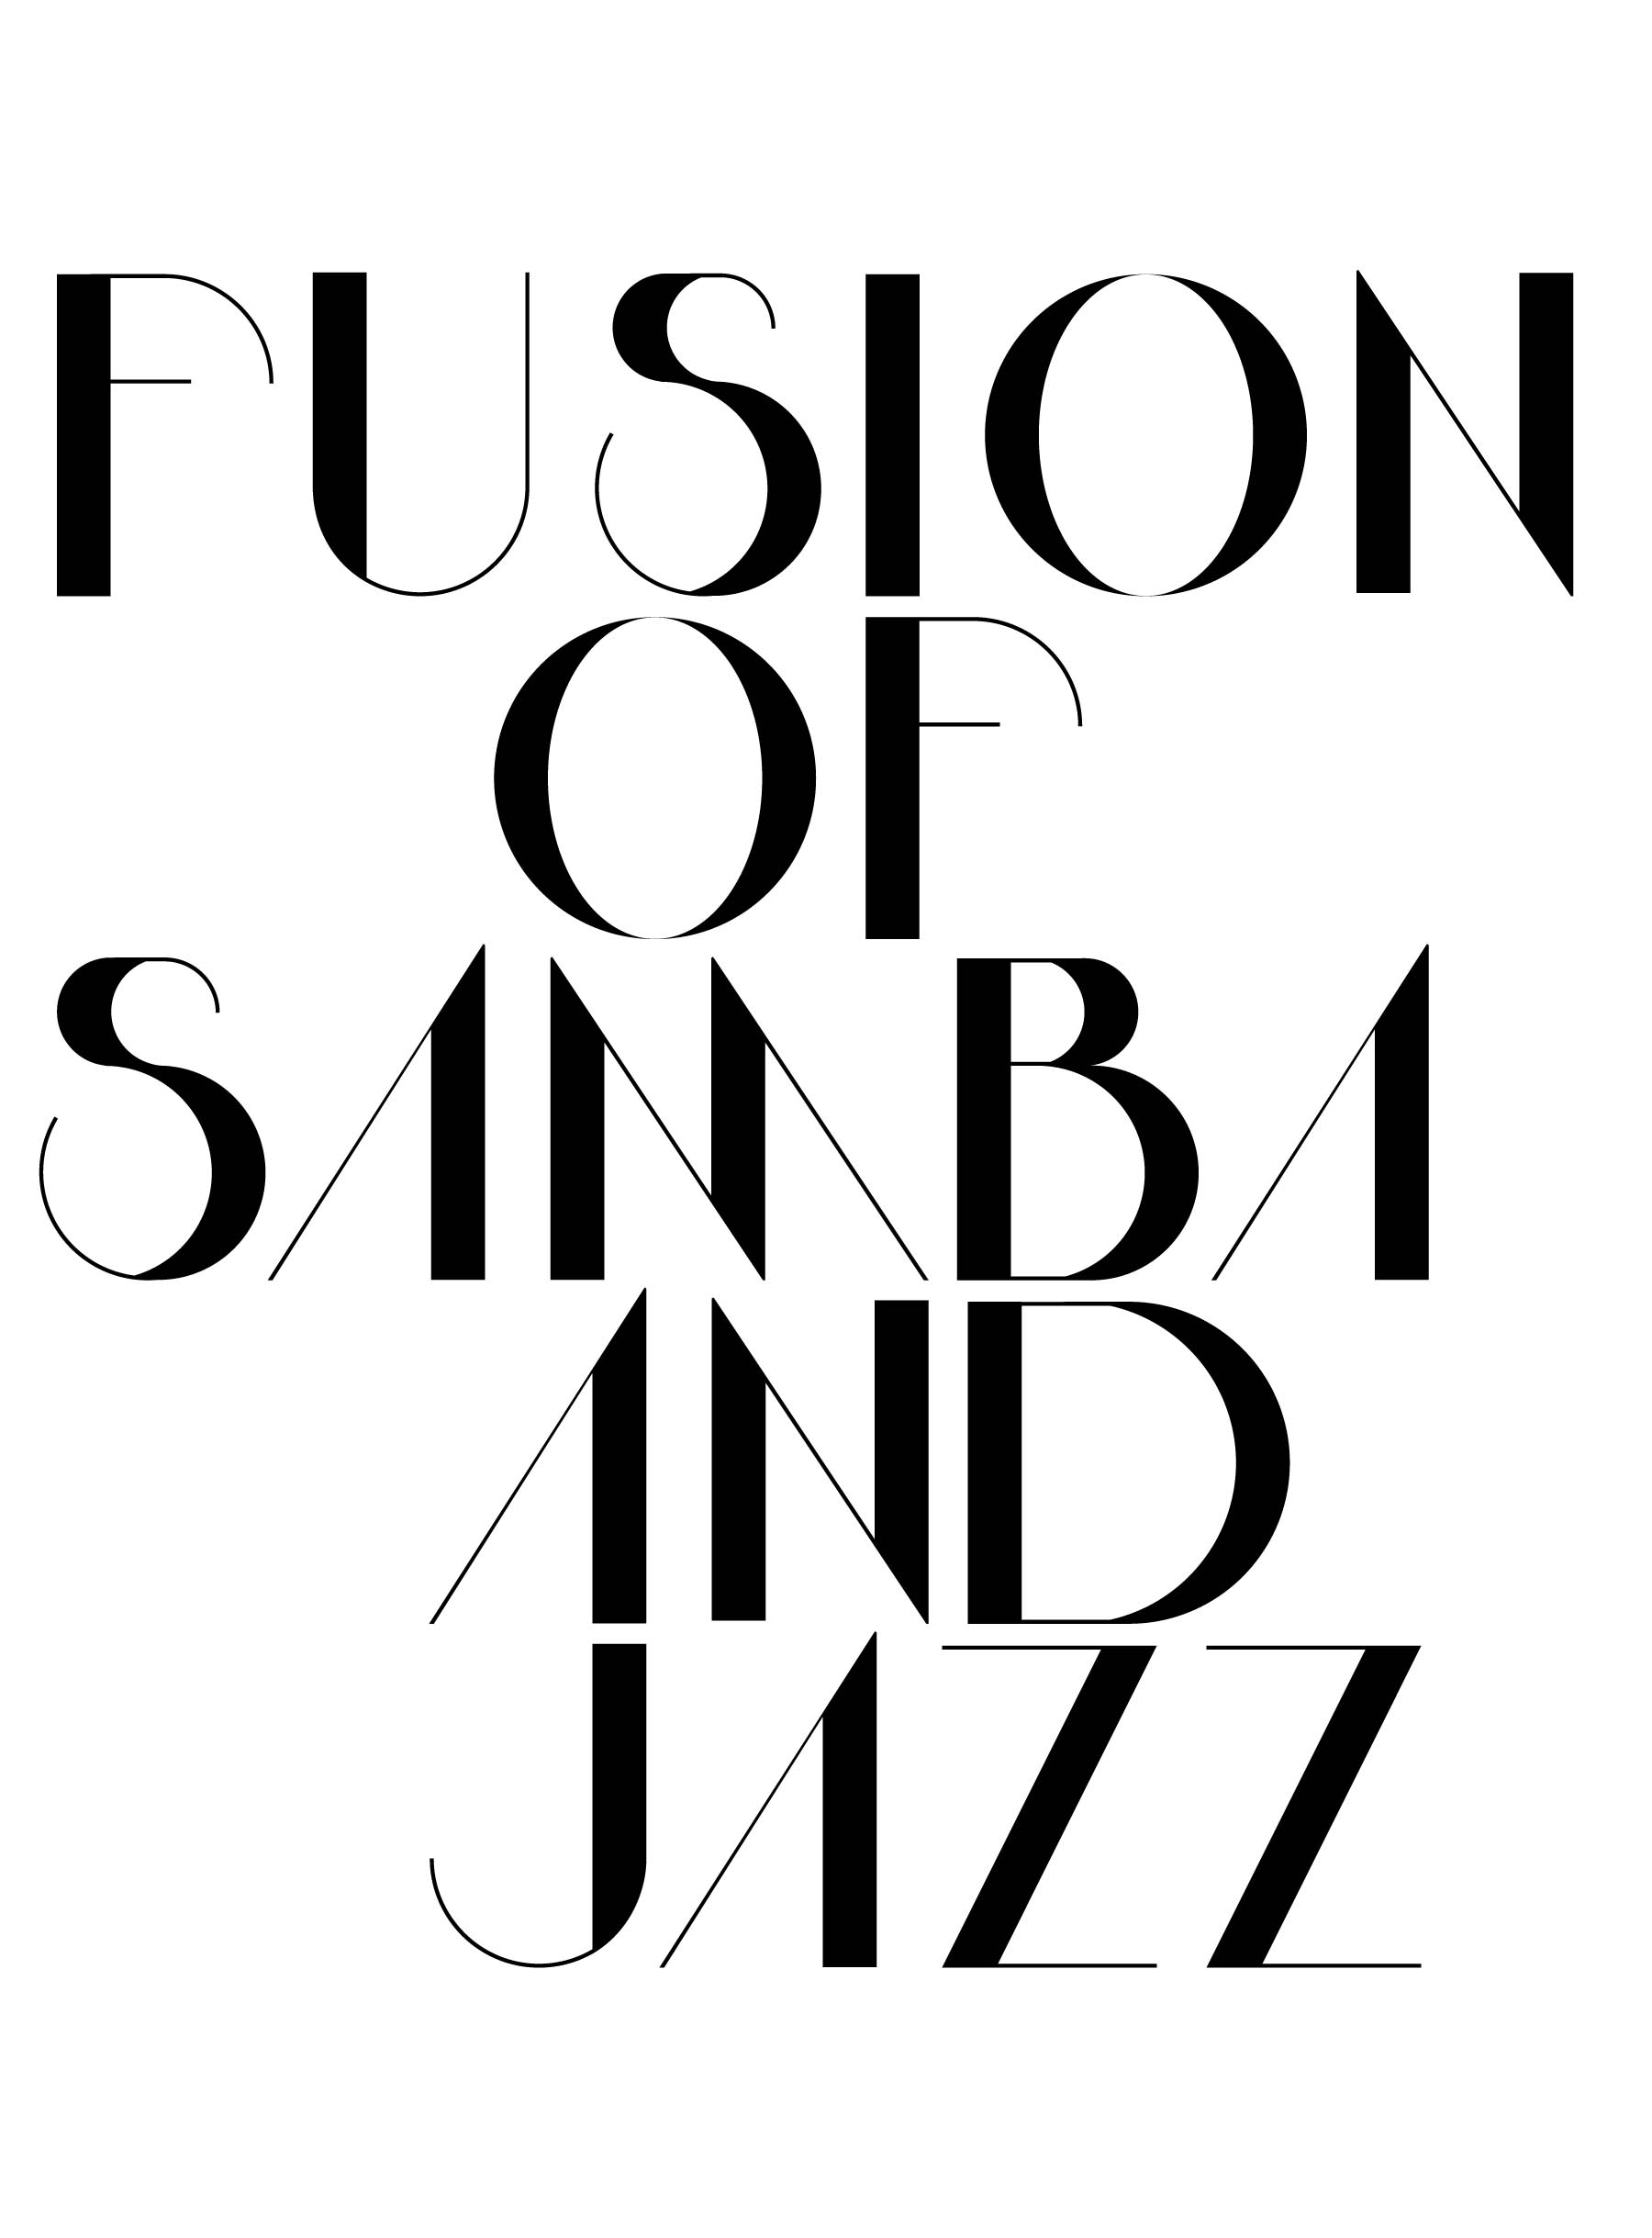 Just like the music genre the typeface is a fusion of Jazz and Samba